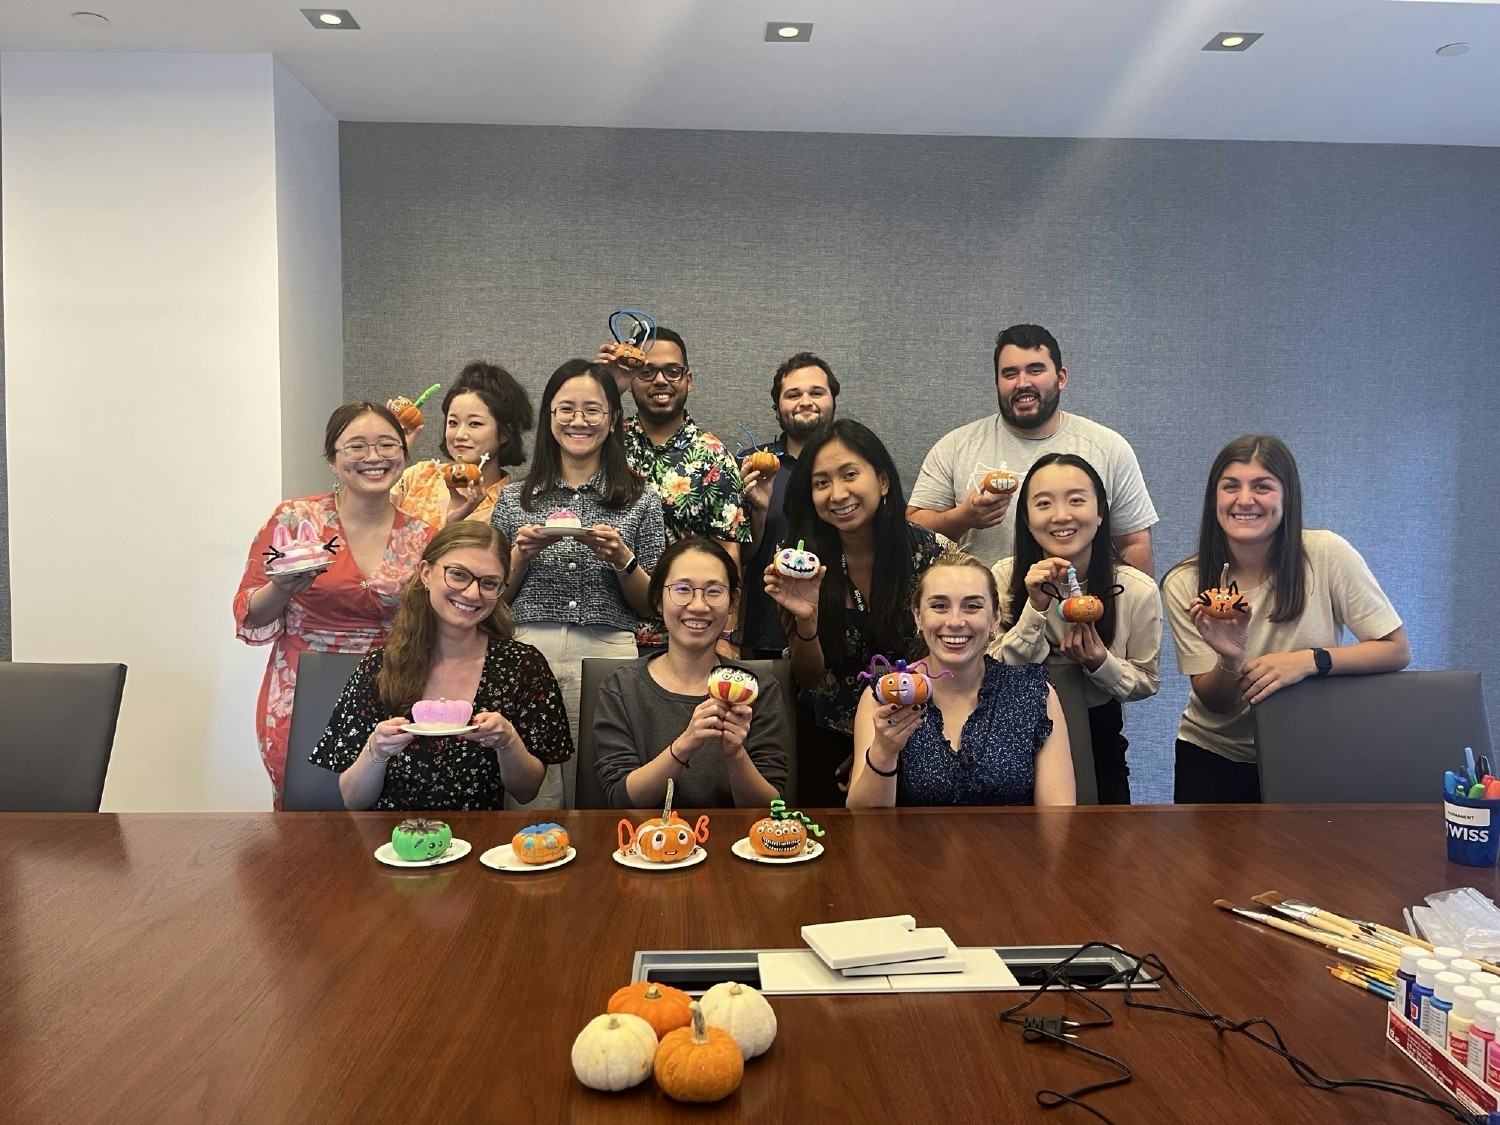 Our New York office is getting in the spooky spirit! Take a look at their creative pumpkin paintings 🎃